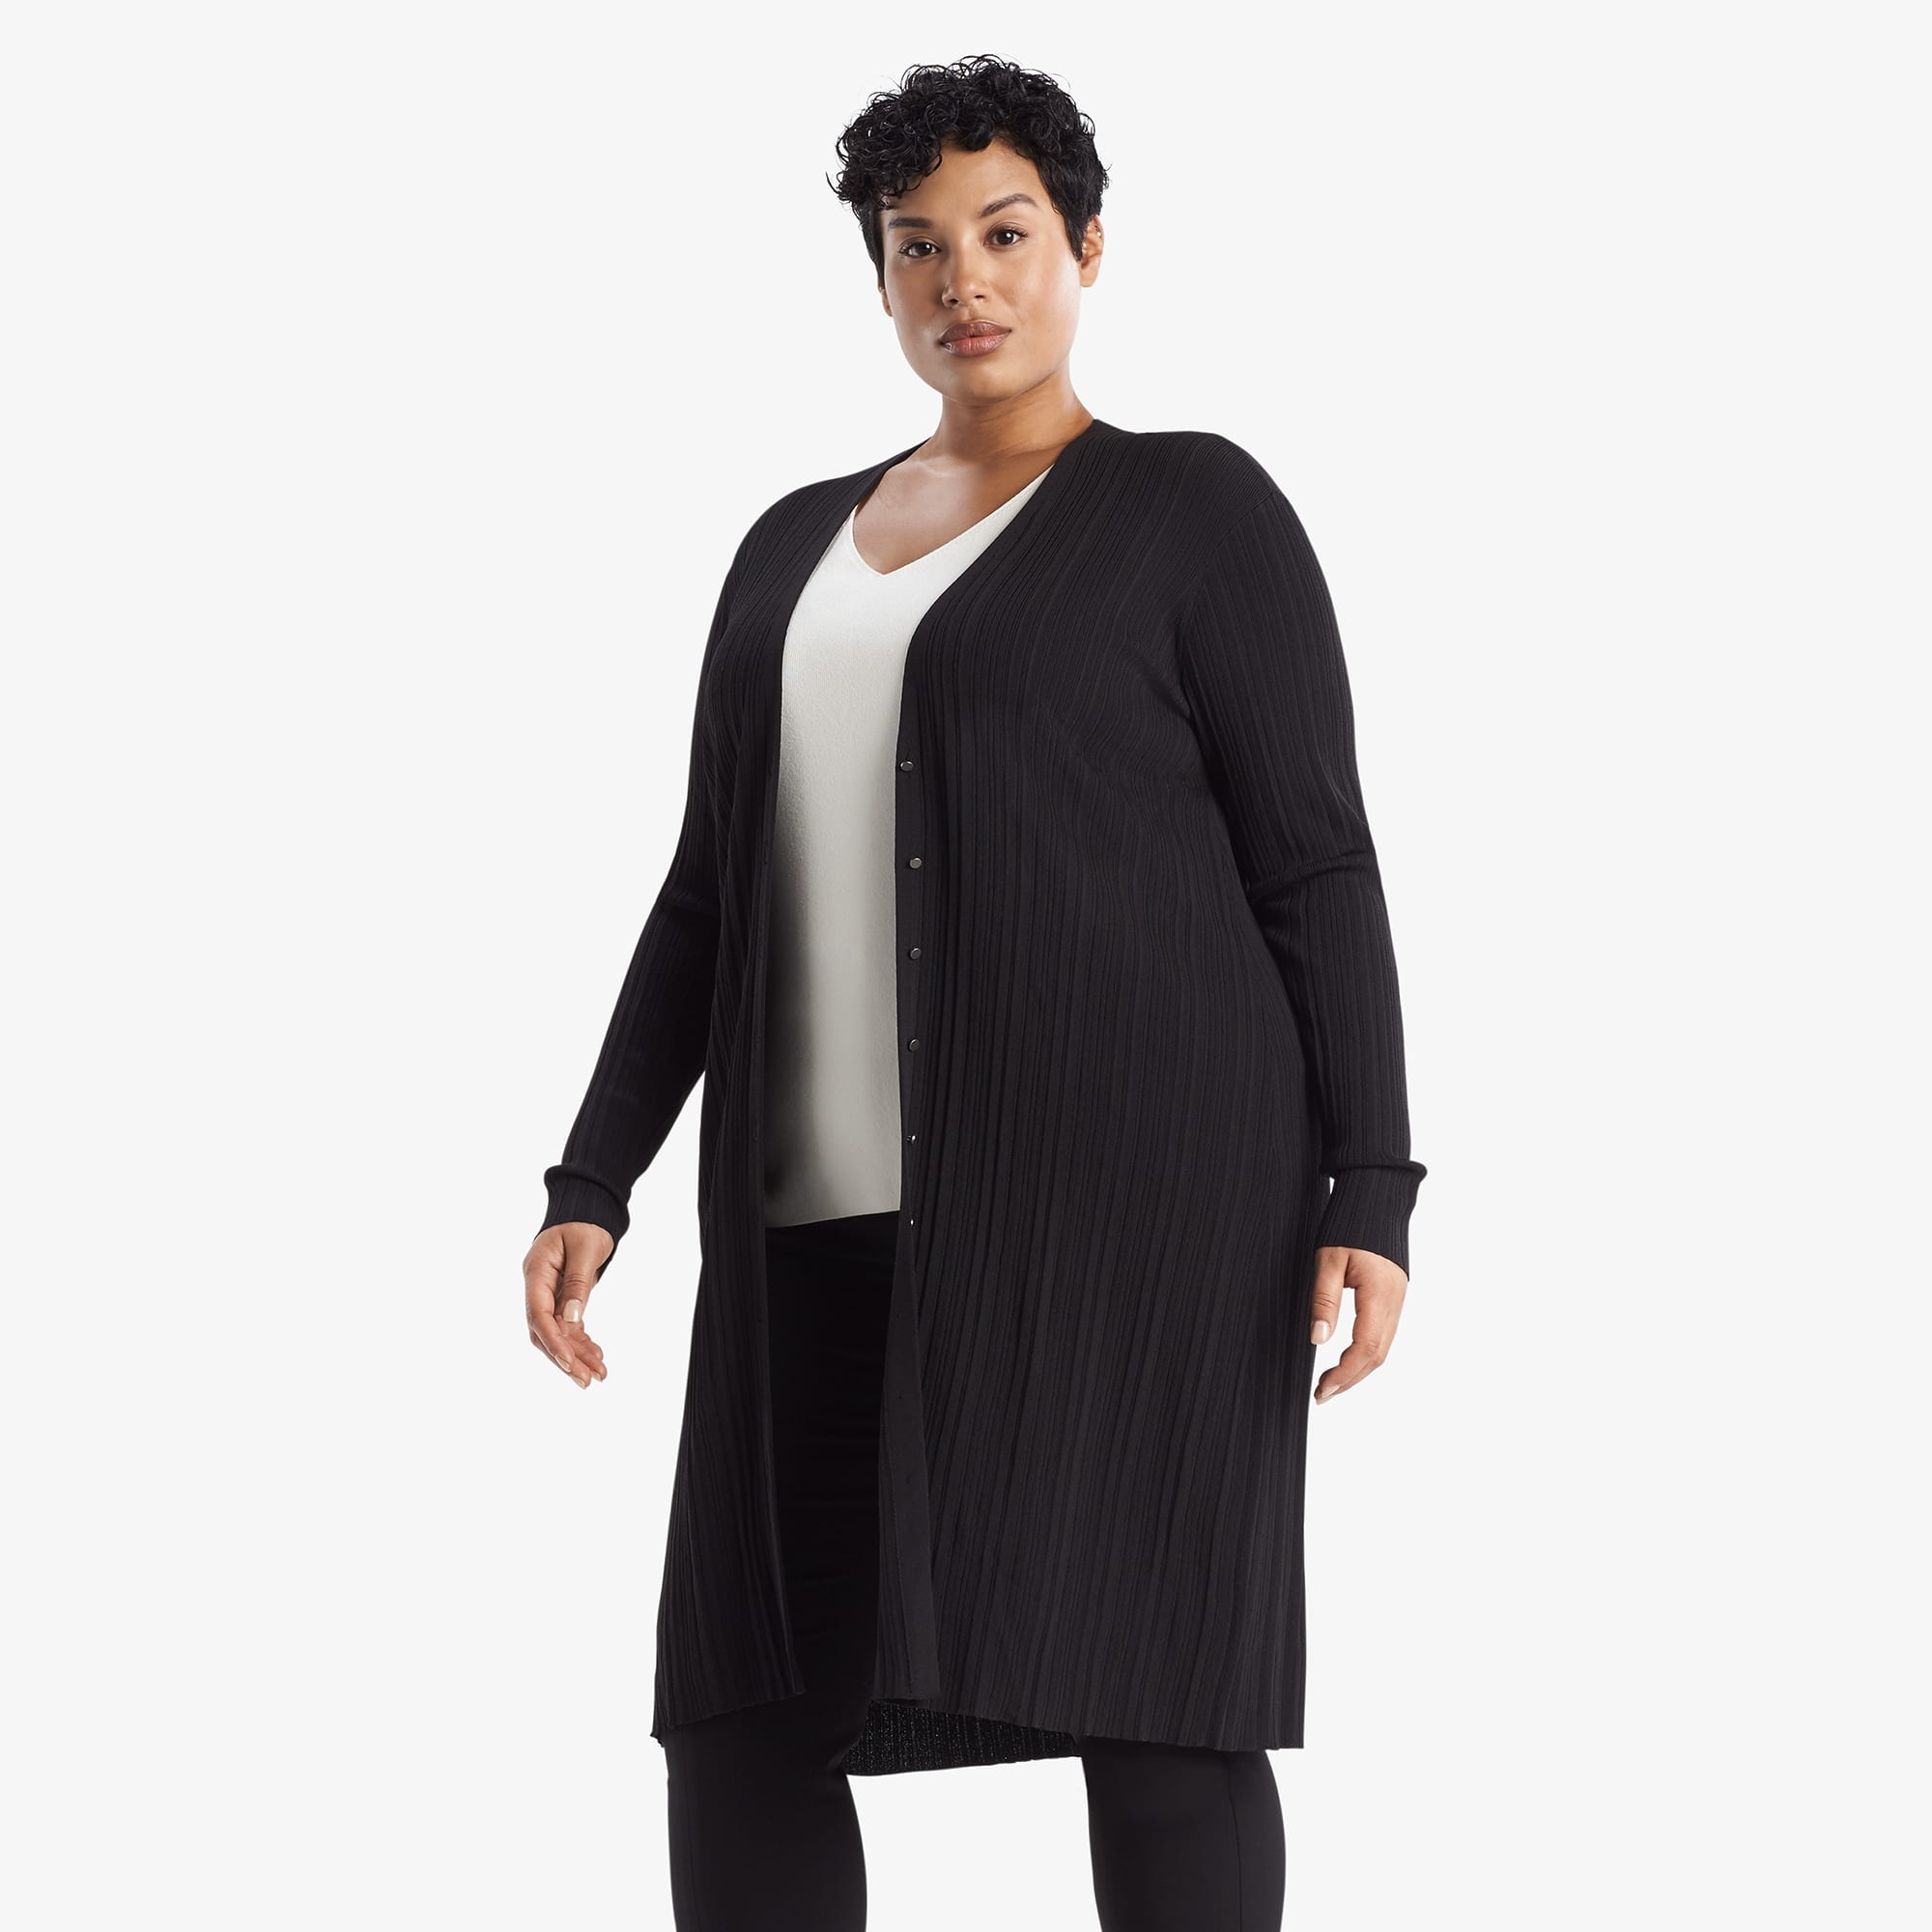 Side image of a woman wearing the Molly Cardigan - Textured Knit in Black